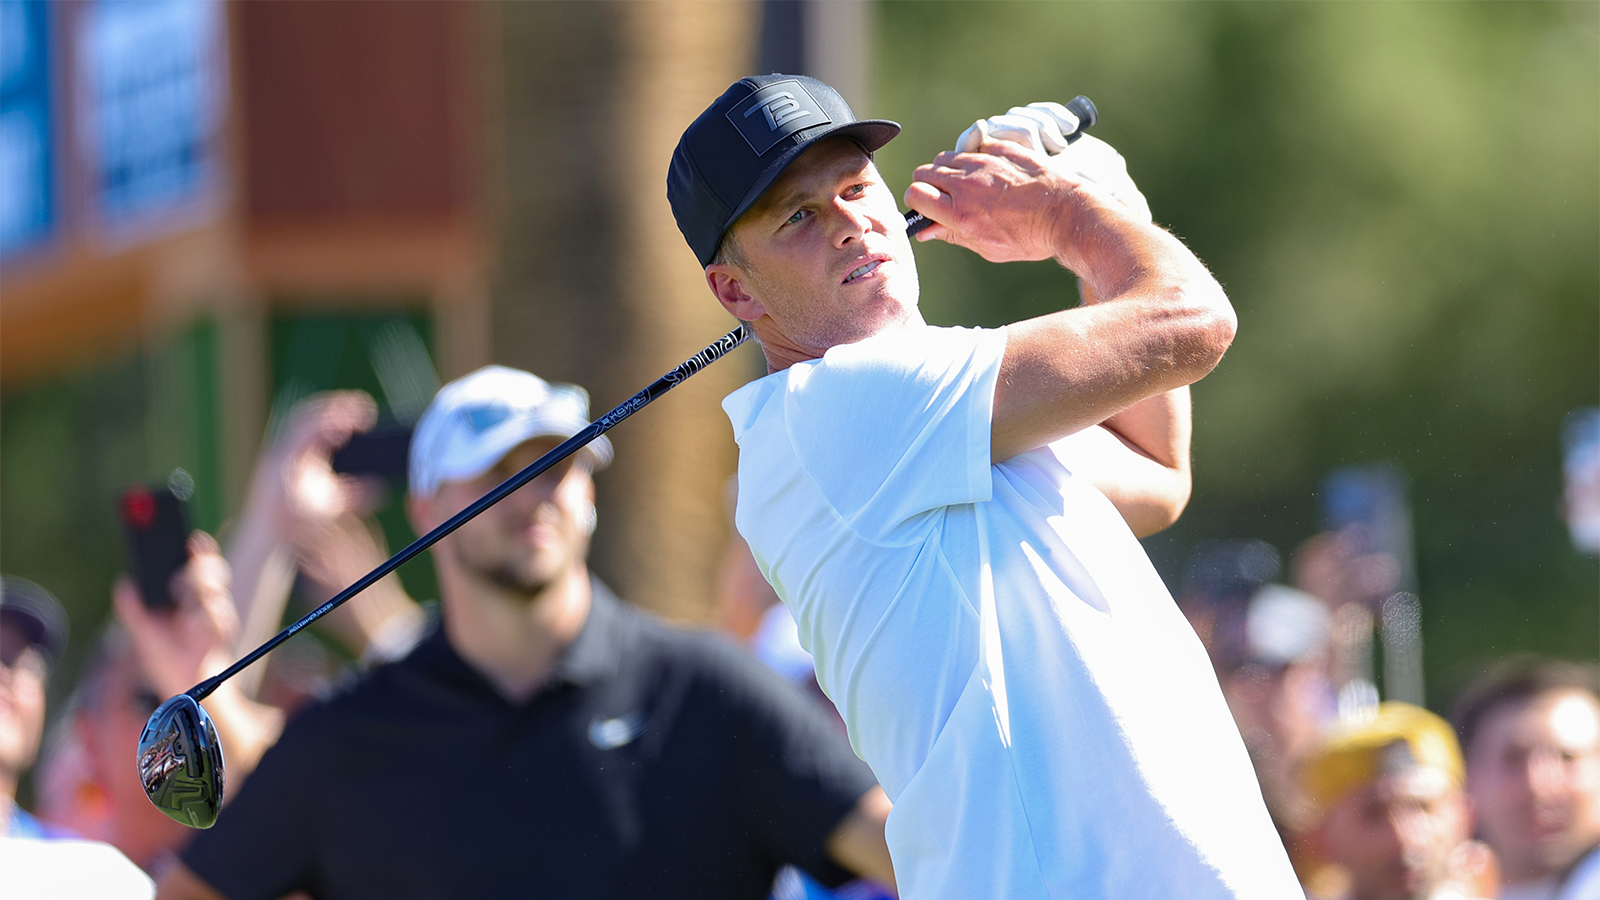  Tom Brady plays a shot during Capital One's The Match VI - Brady & Rodgers v Allen & Mahomes at Wynn Golf Club on June 01, 2022 in Las Vegas, Nevada. (Photo by Carmen Mandato/Getty Images for The Match)